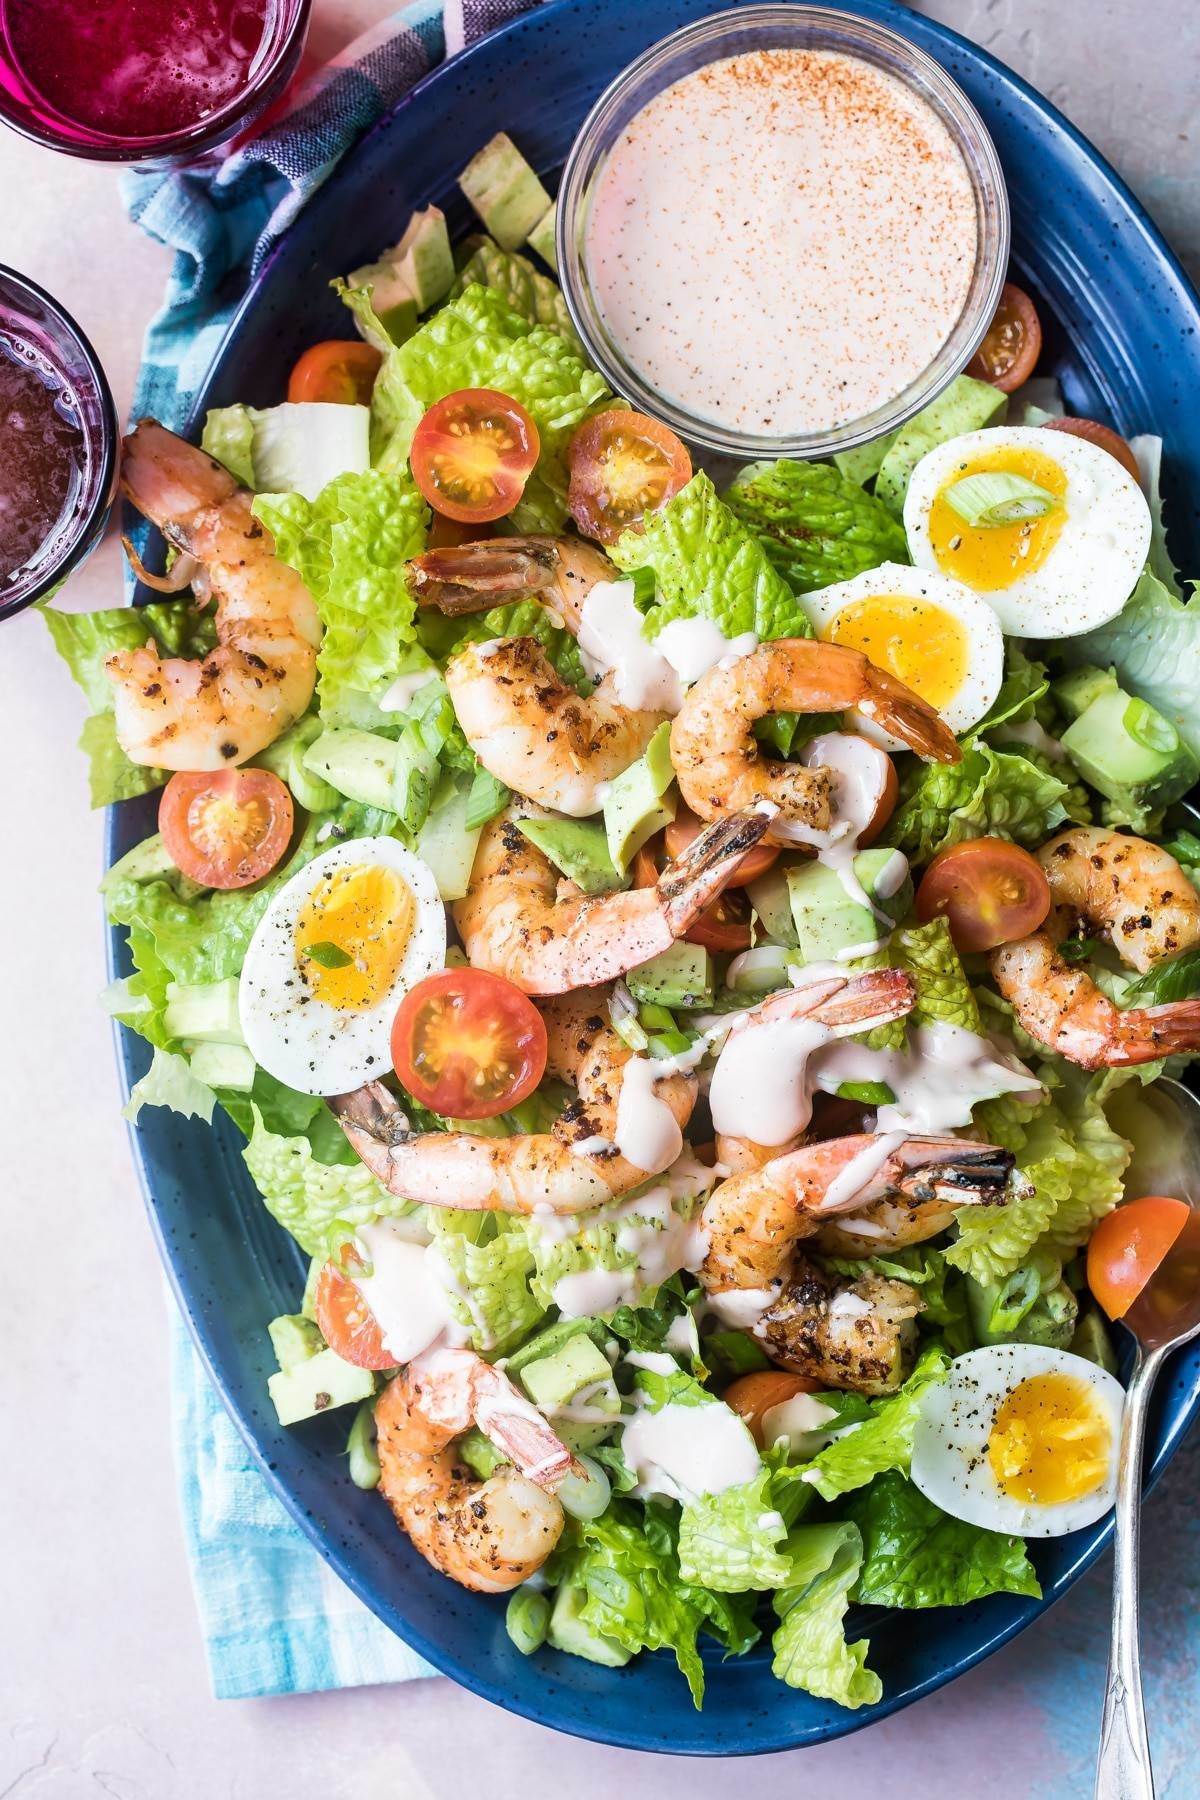 Shrimp Louie salad with hard boiled egg, tomato, lettuce, and dressing.